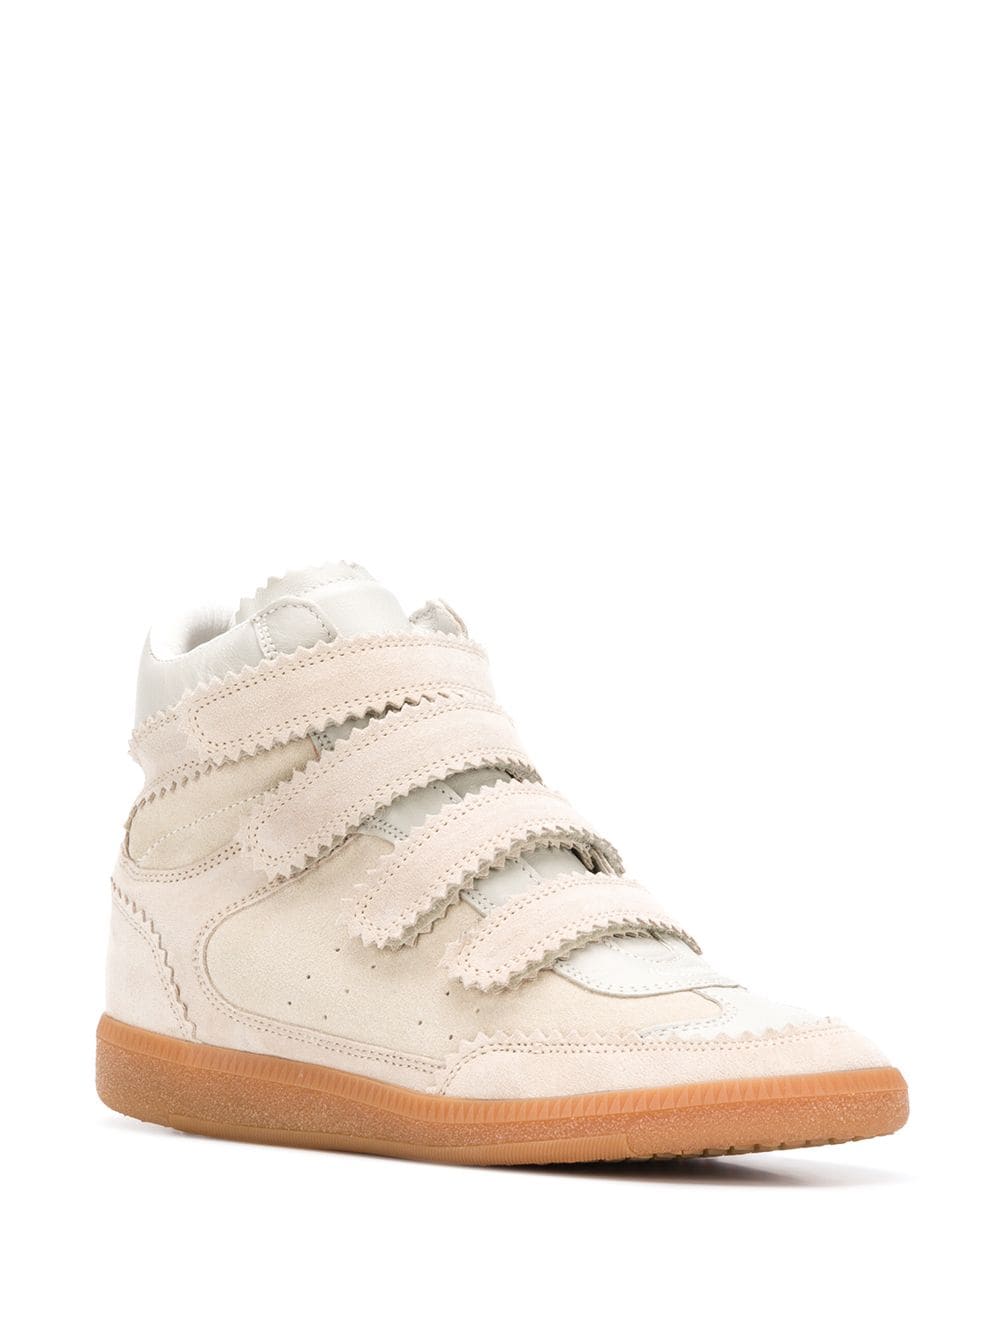 Shop Isabel Marant Bilsy high-top sneakers with Express Delivery - FARFETCH